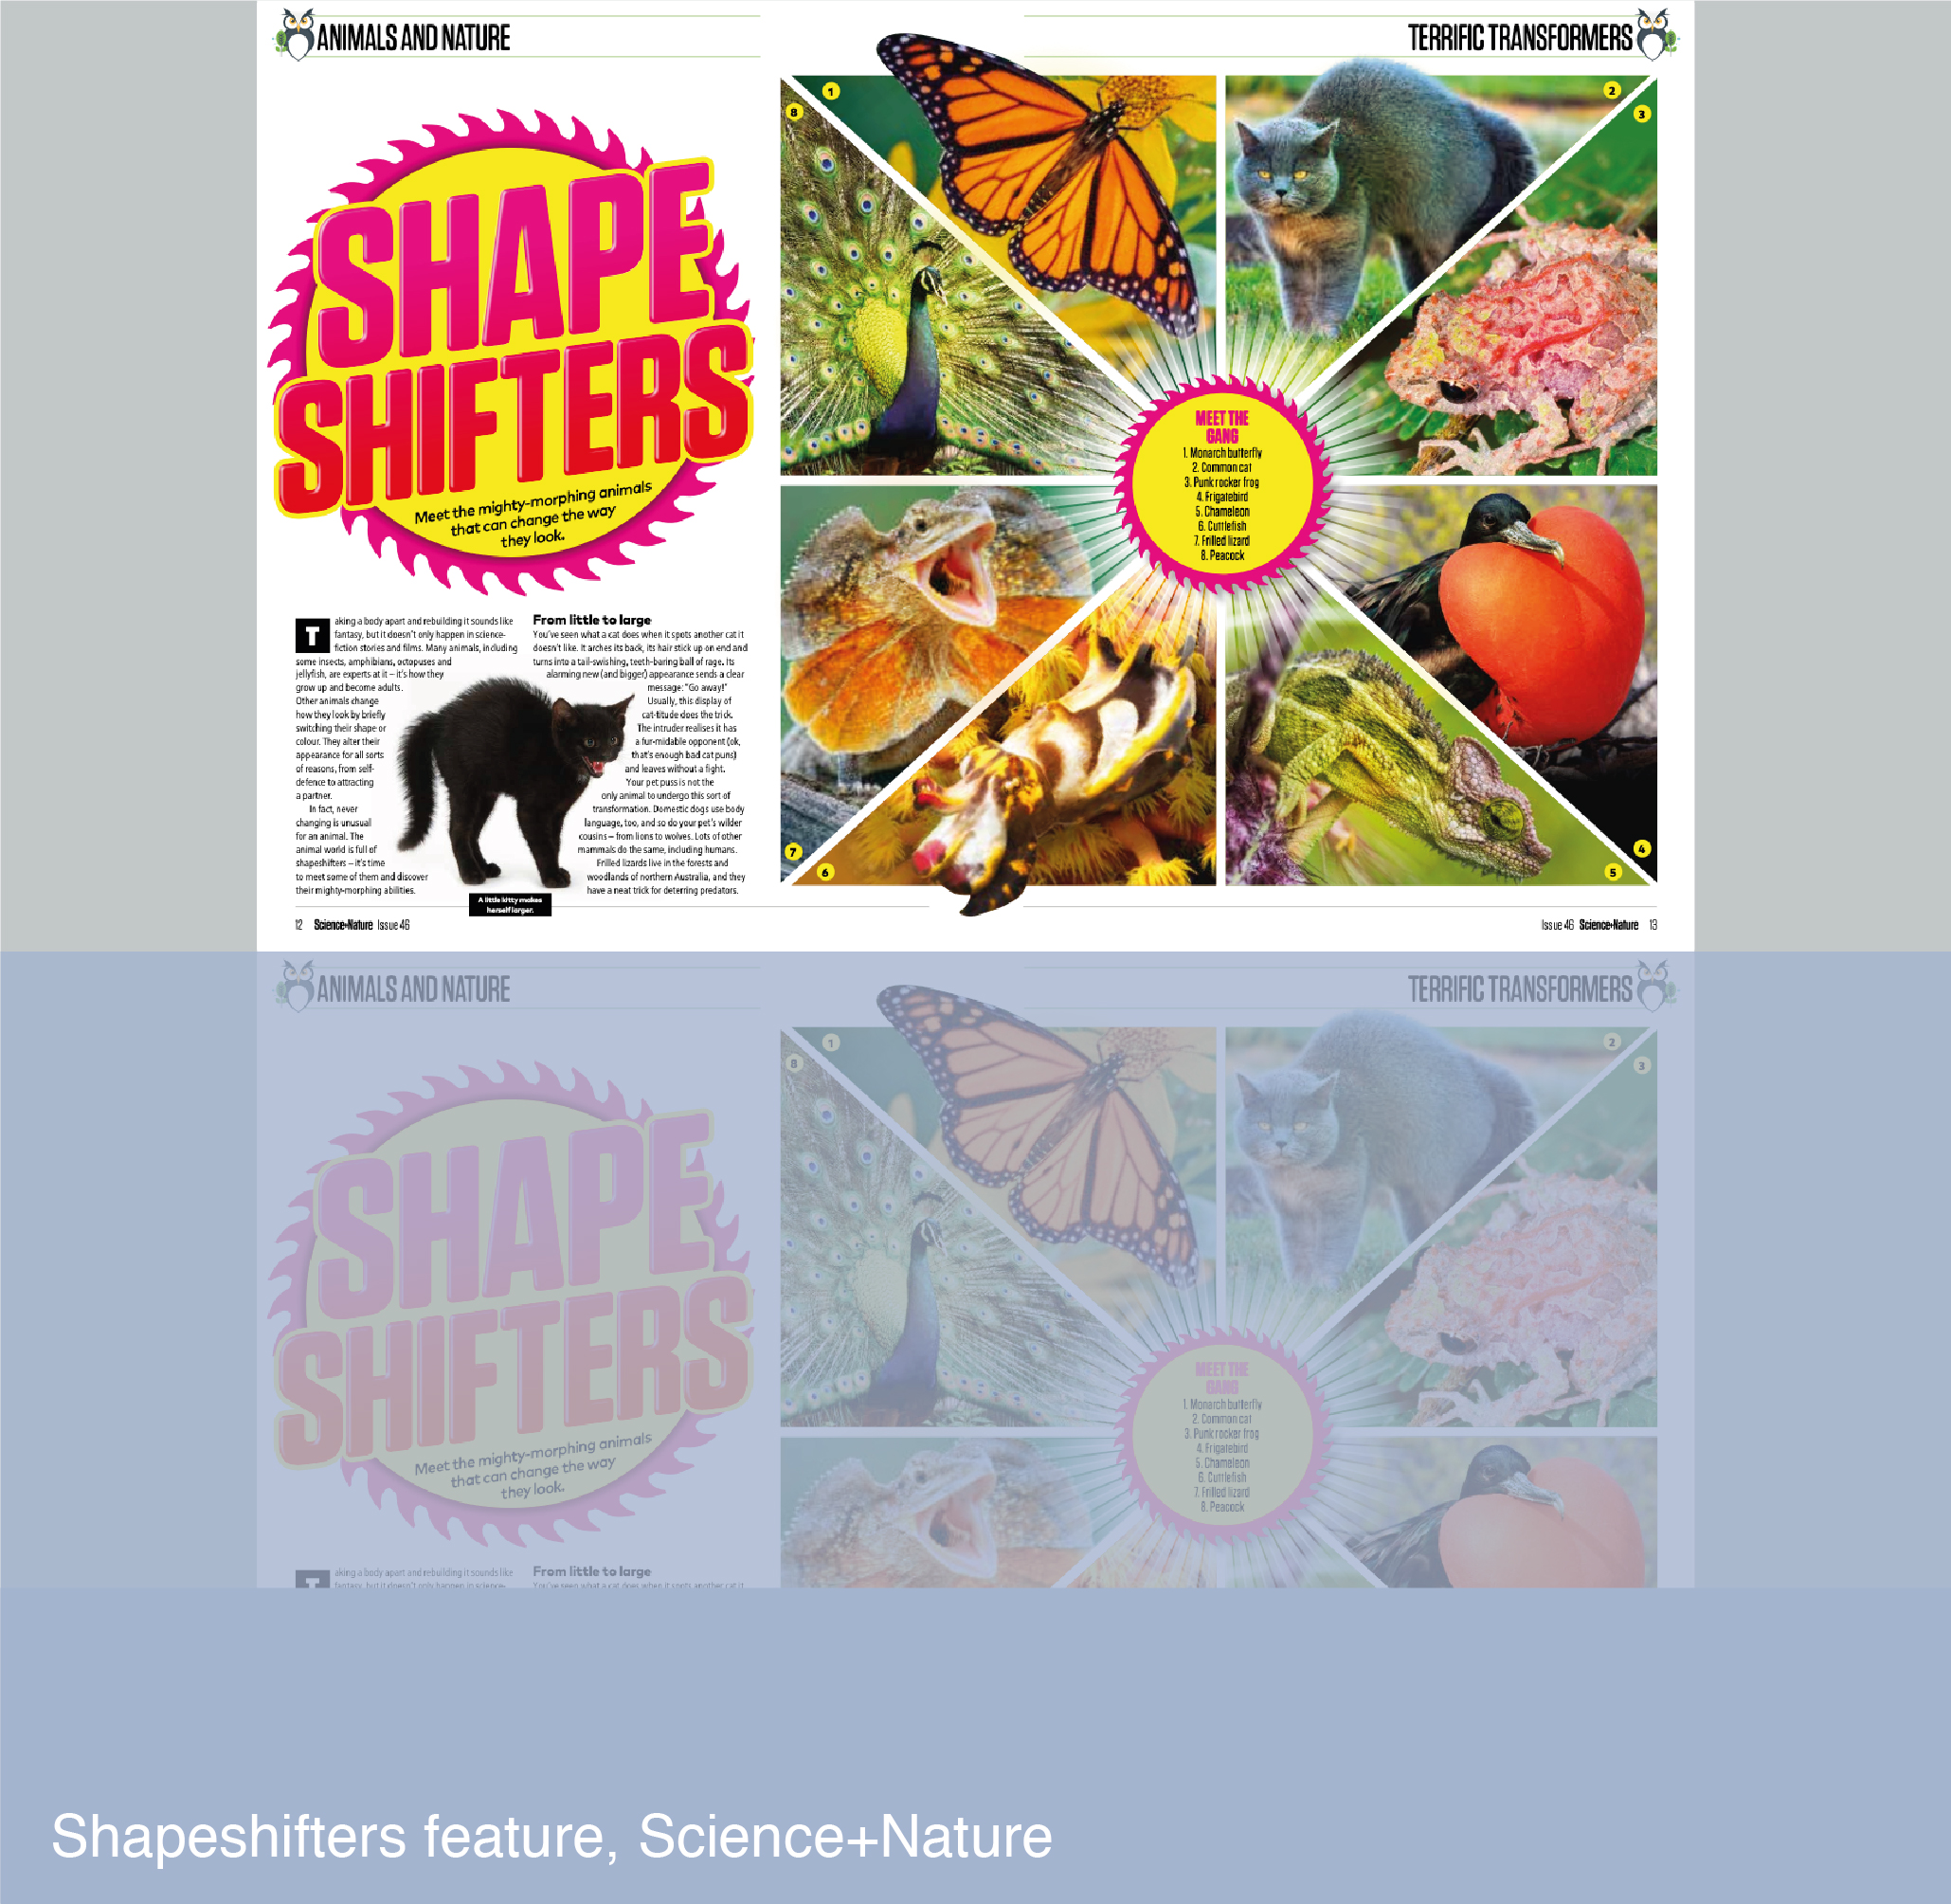 Shapeshifters feature for Science+Nature